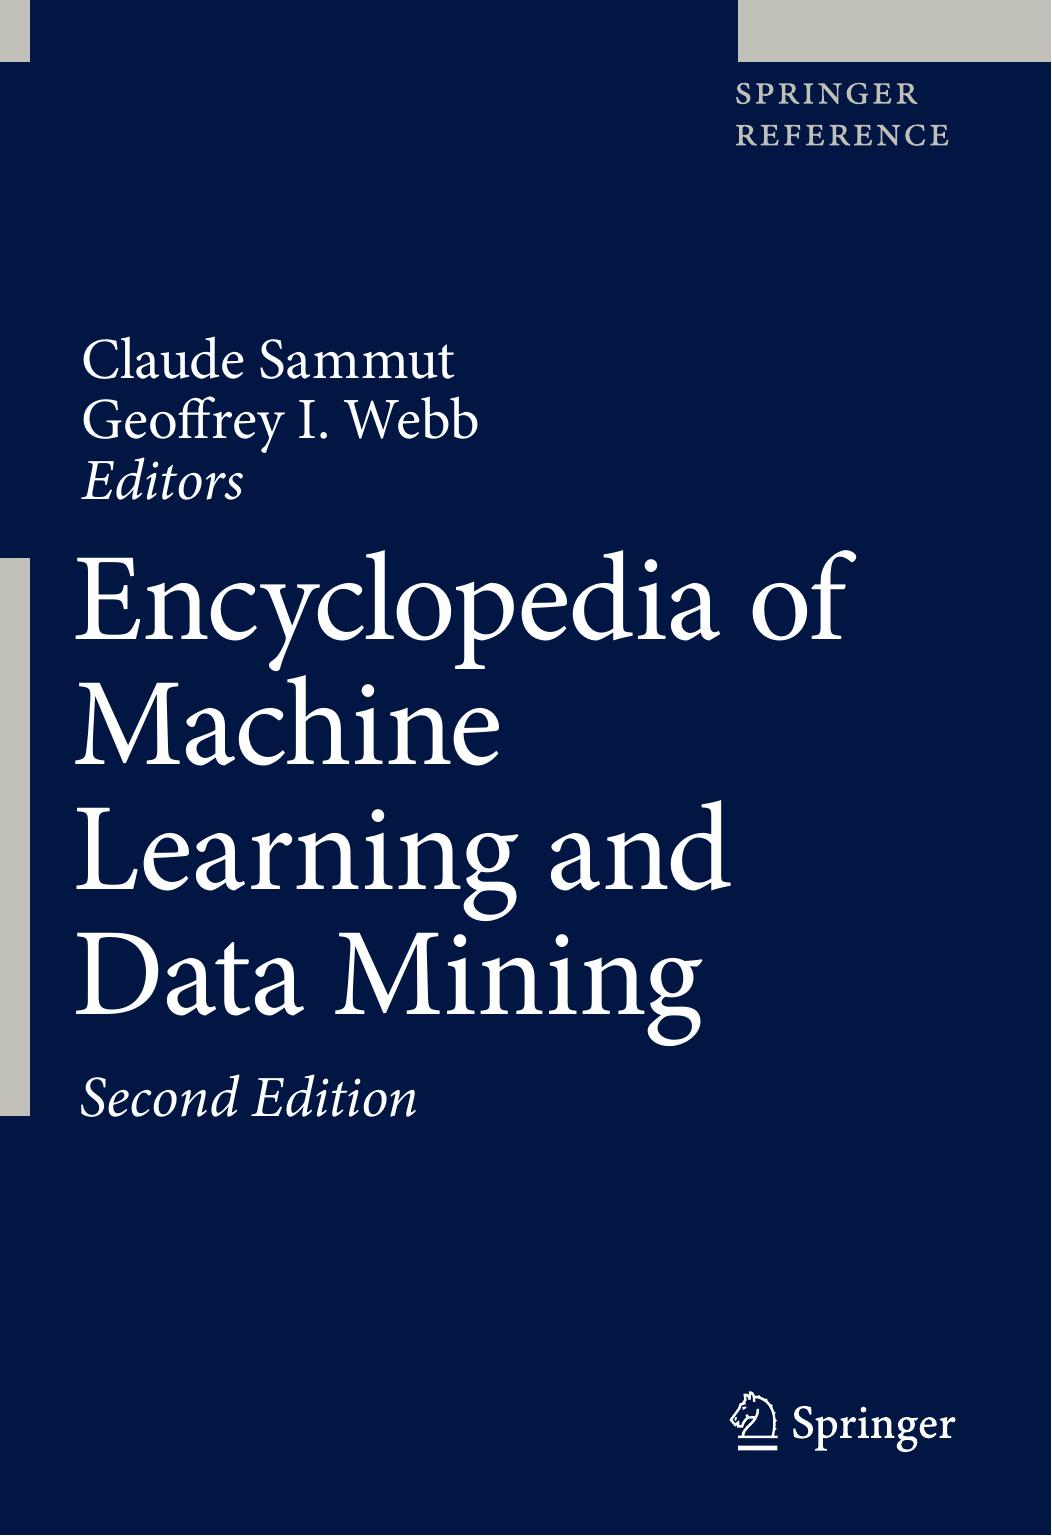 Encyclopedia of Machine Learning and Data Mining